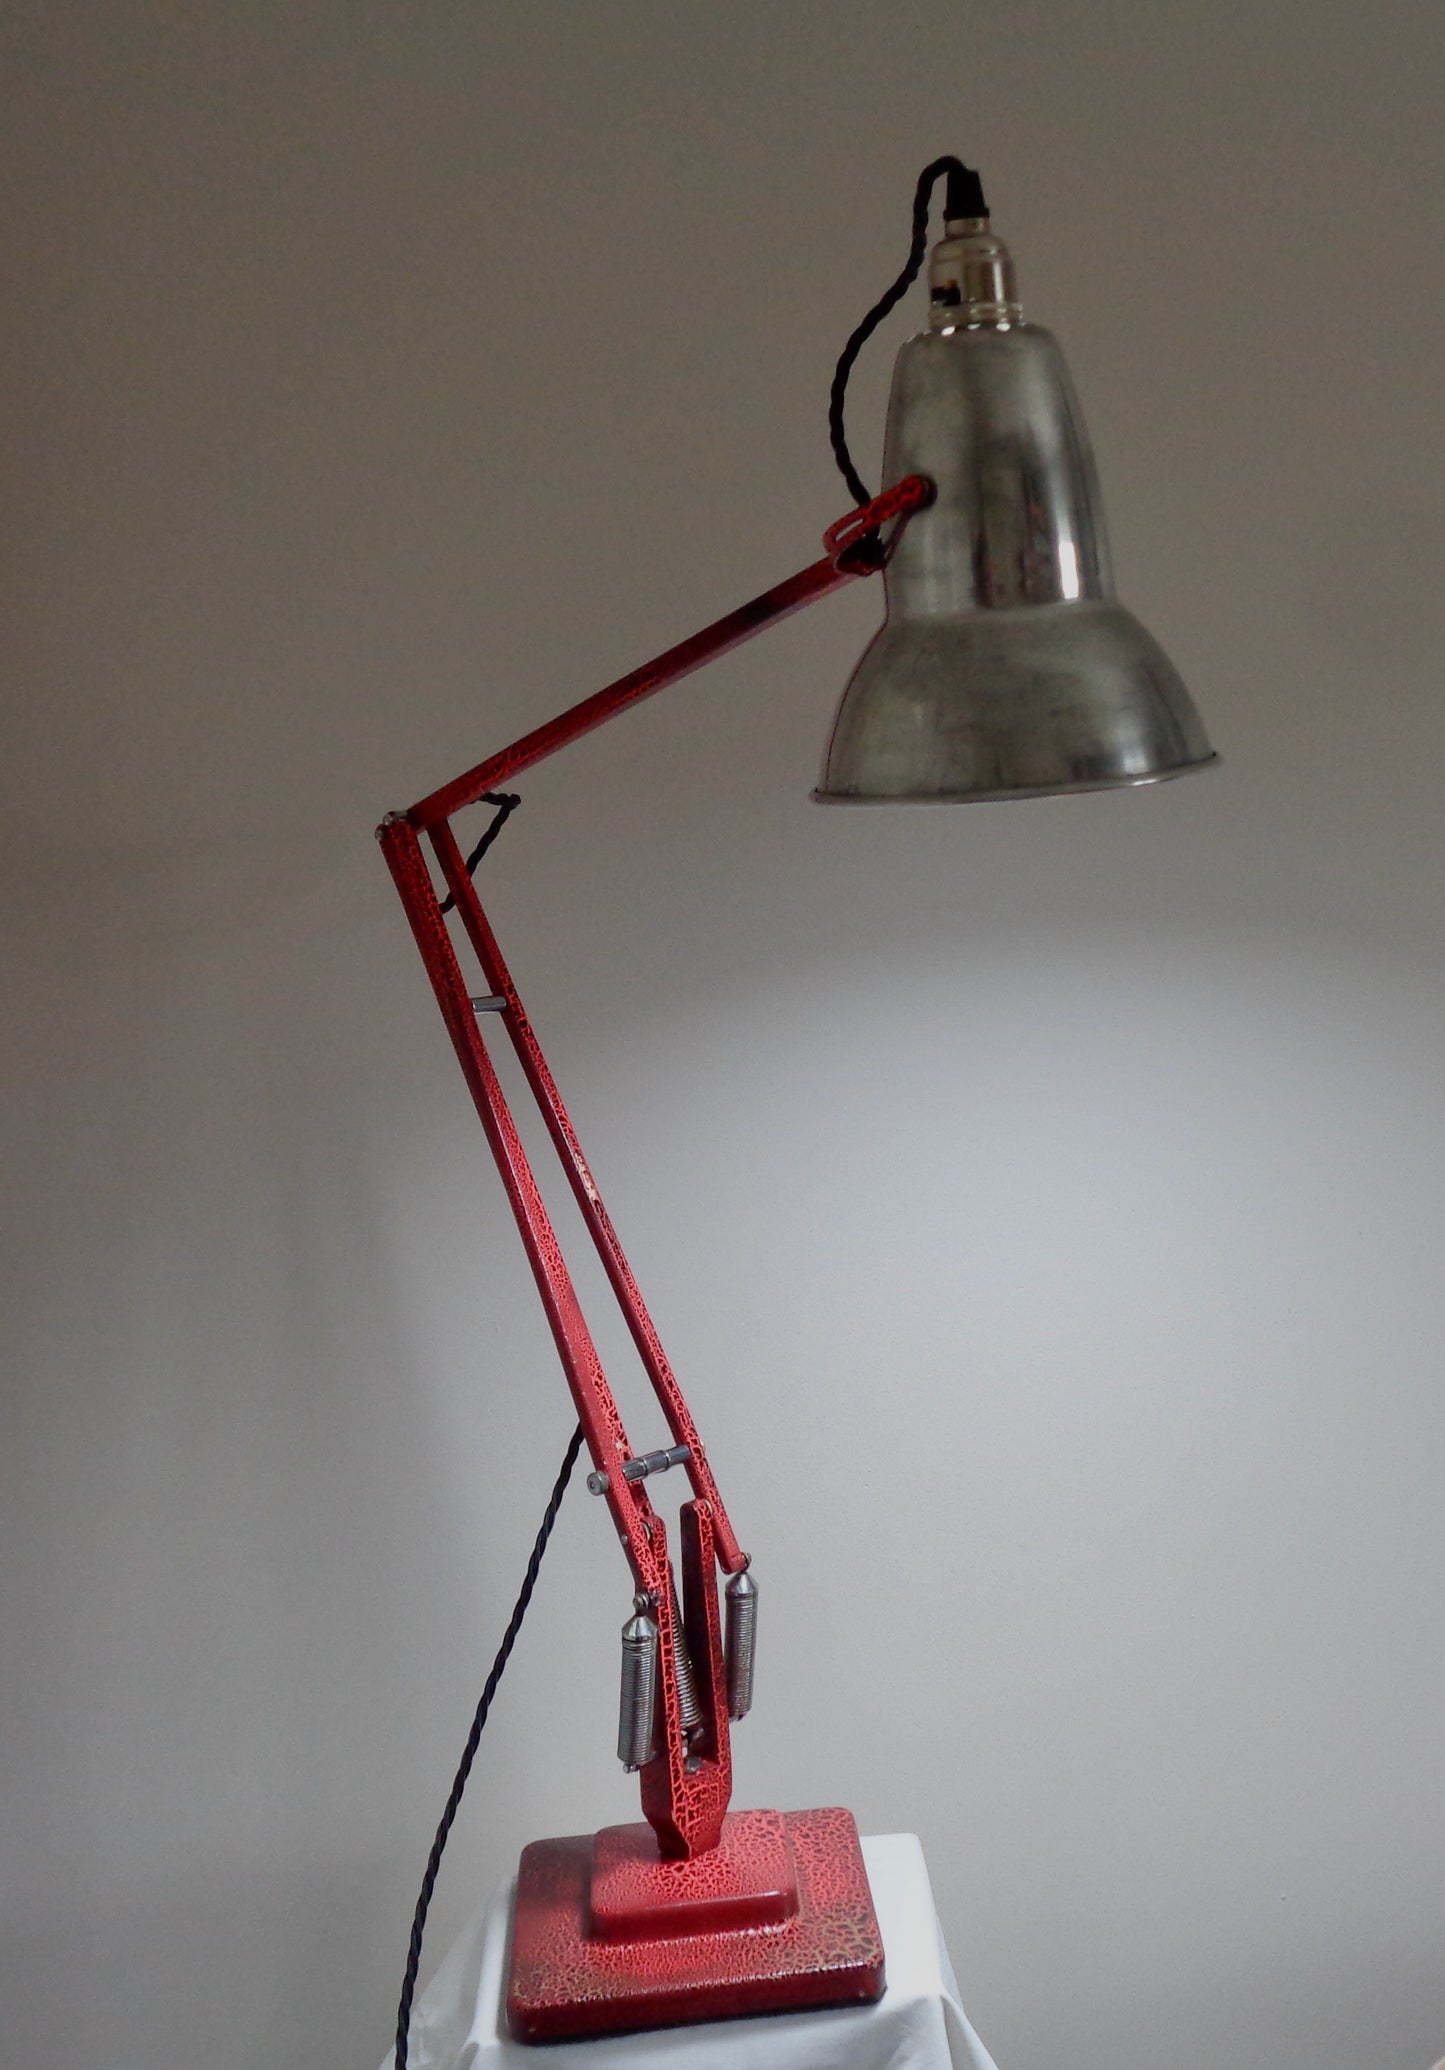 1950s Anglepoise 1227 Desk Lamp With Red Crackle Glaze Paint And Black Flex